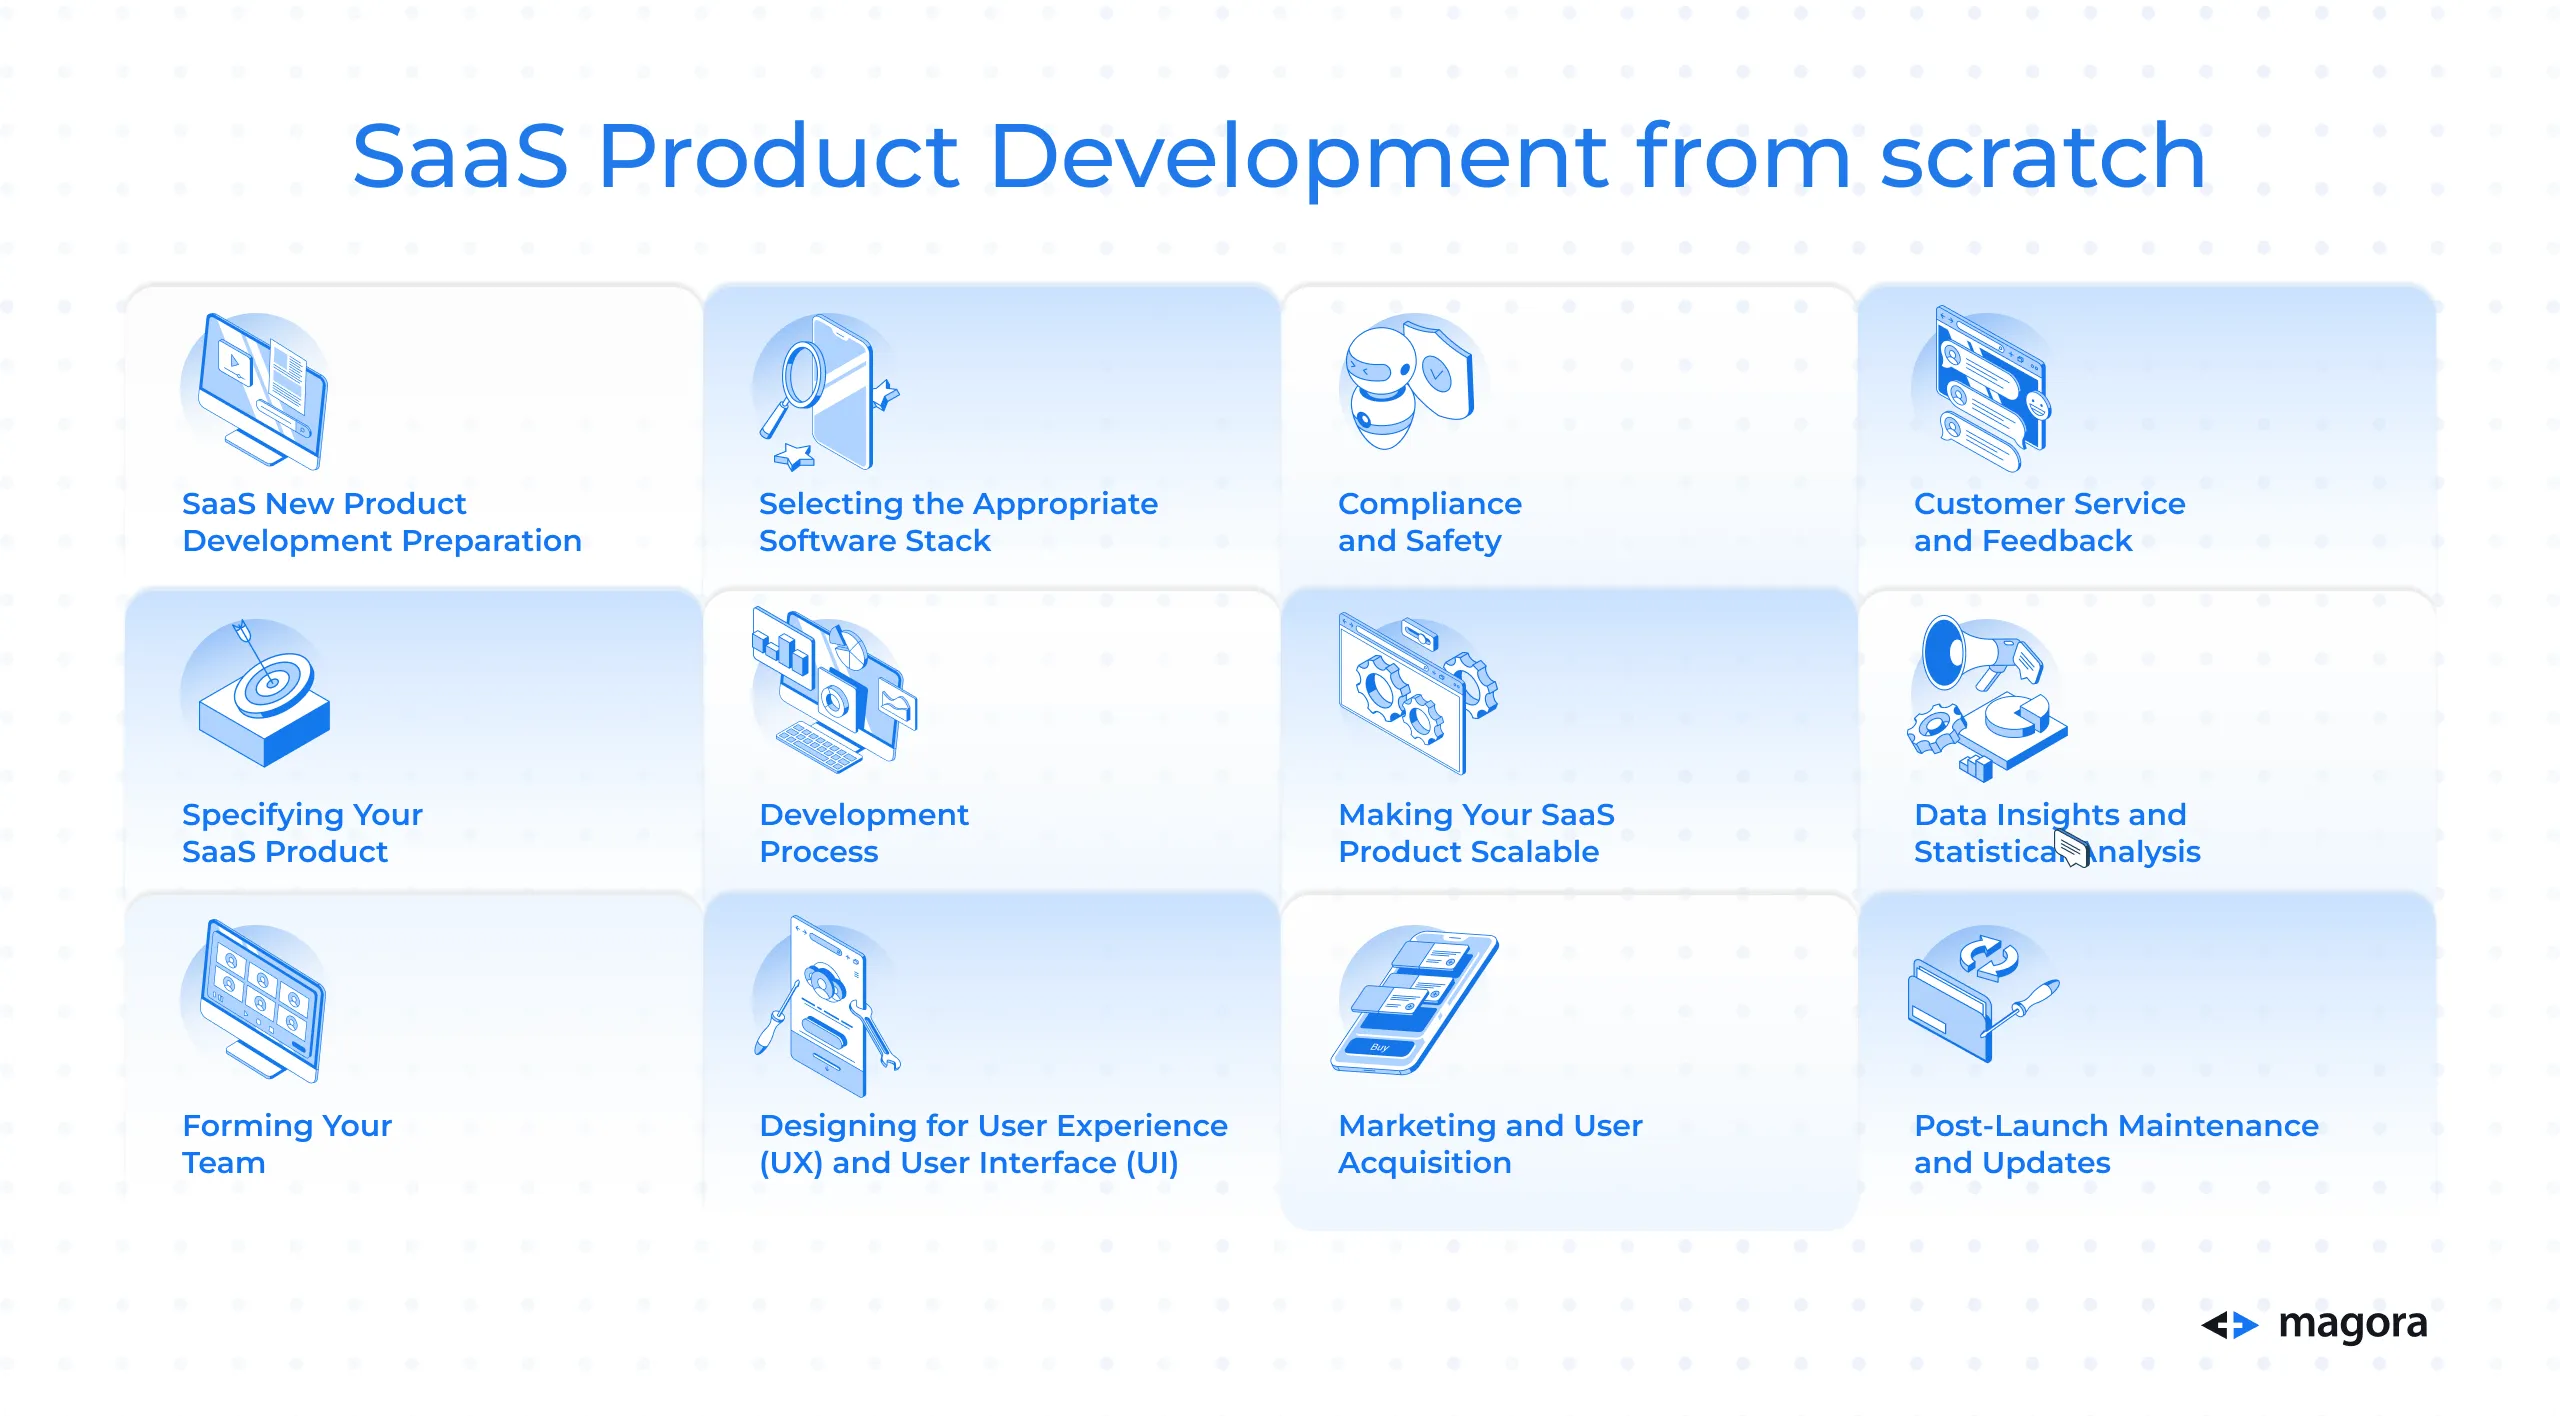 SaaS Product Development from scratch: A Guide